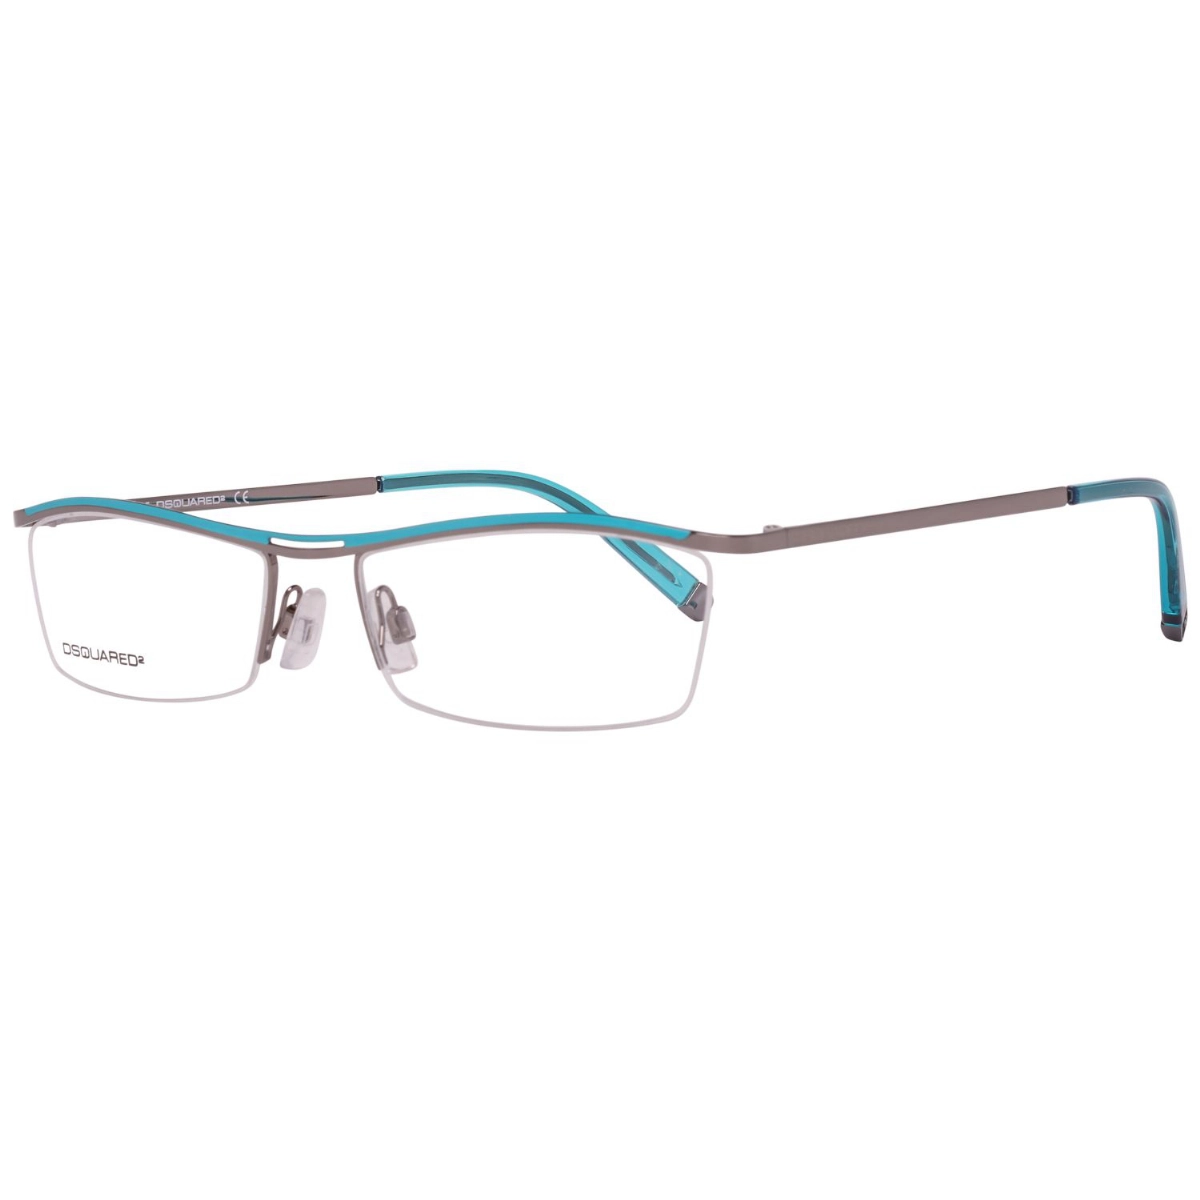 GLASSES FOR WOMAN DSQUARED2 DQ5001-008-53